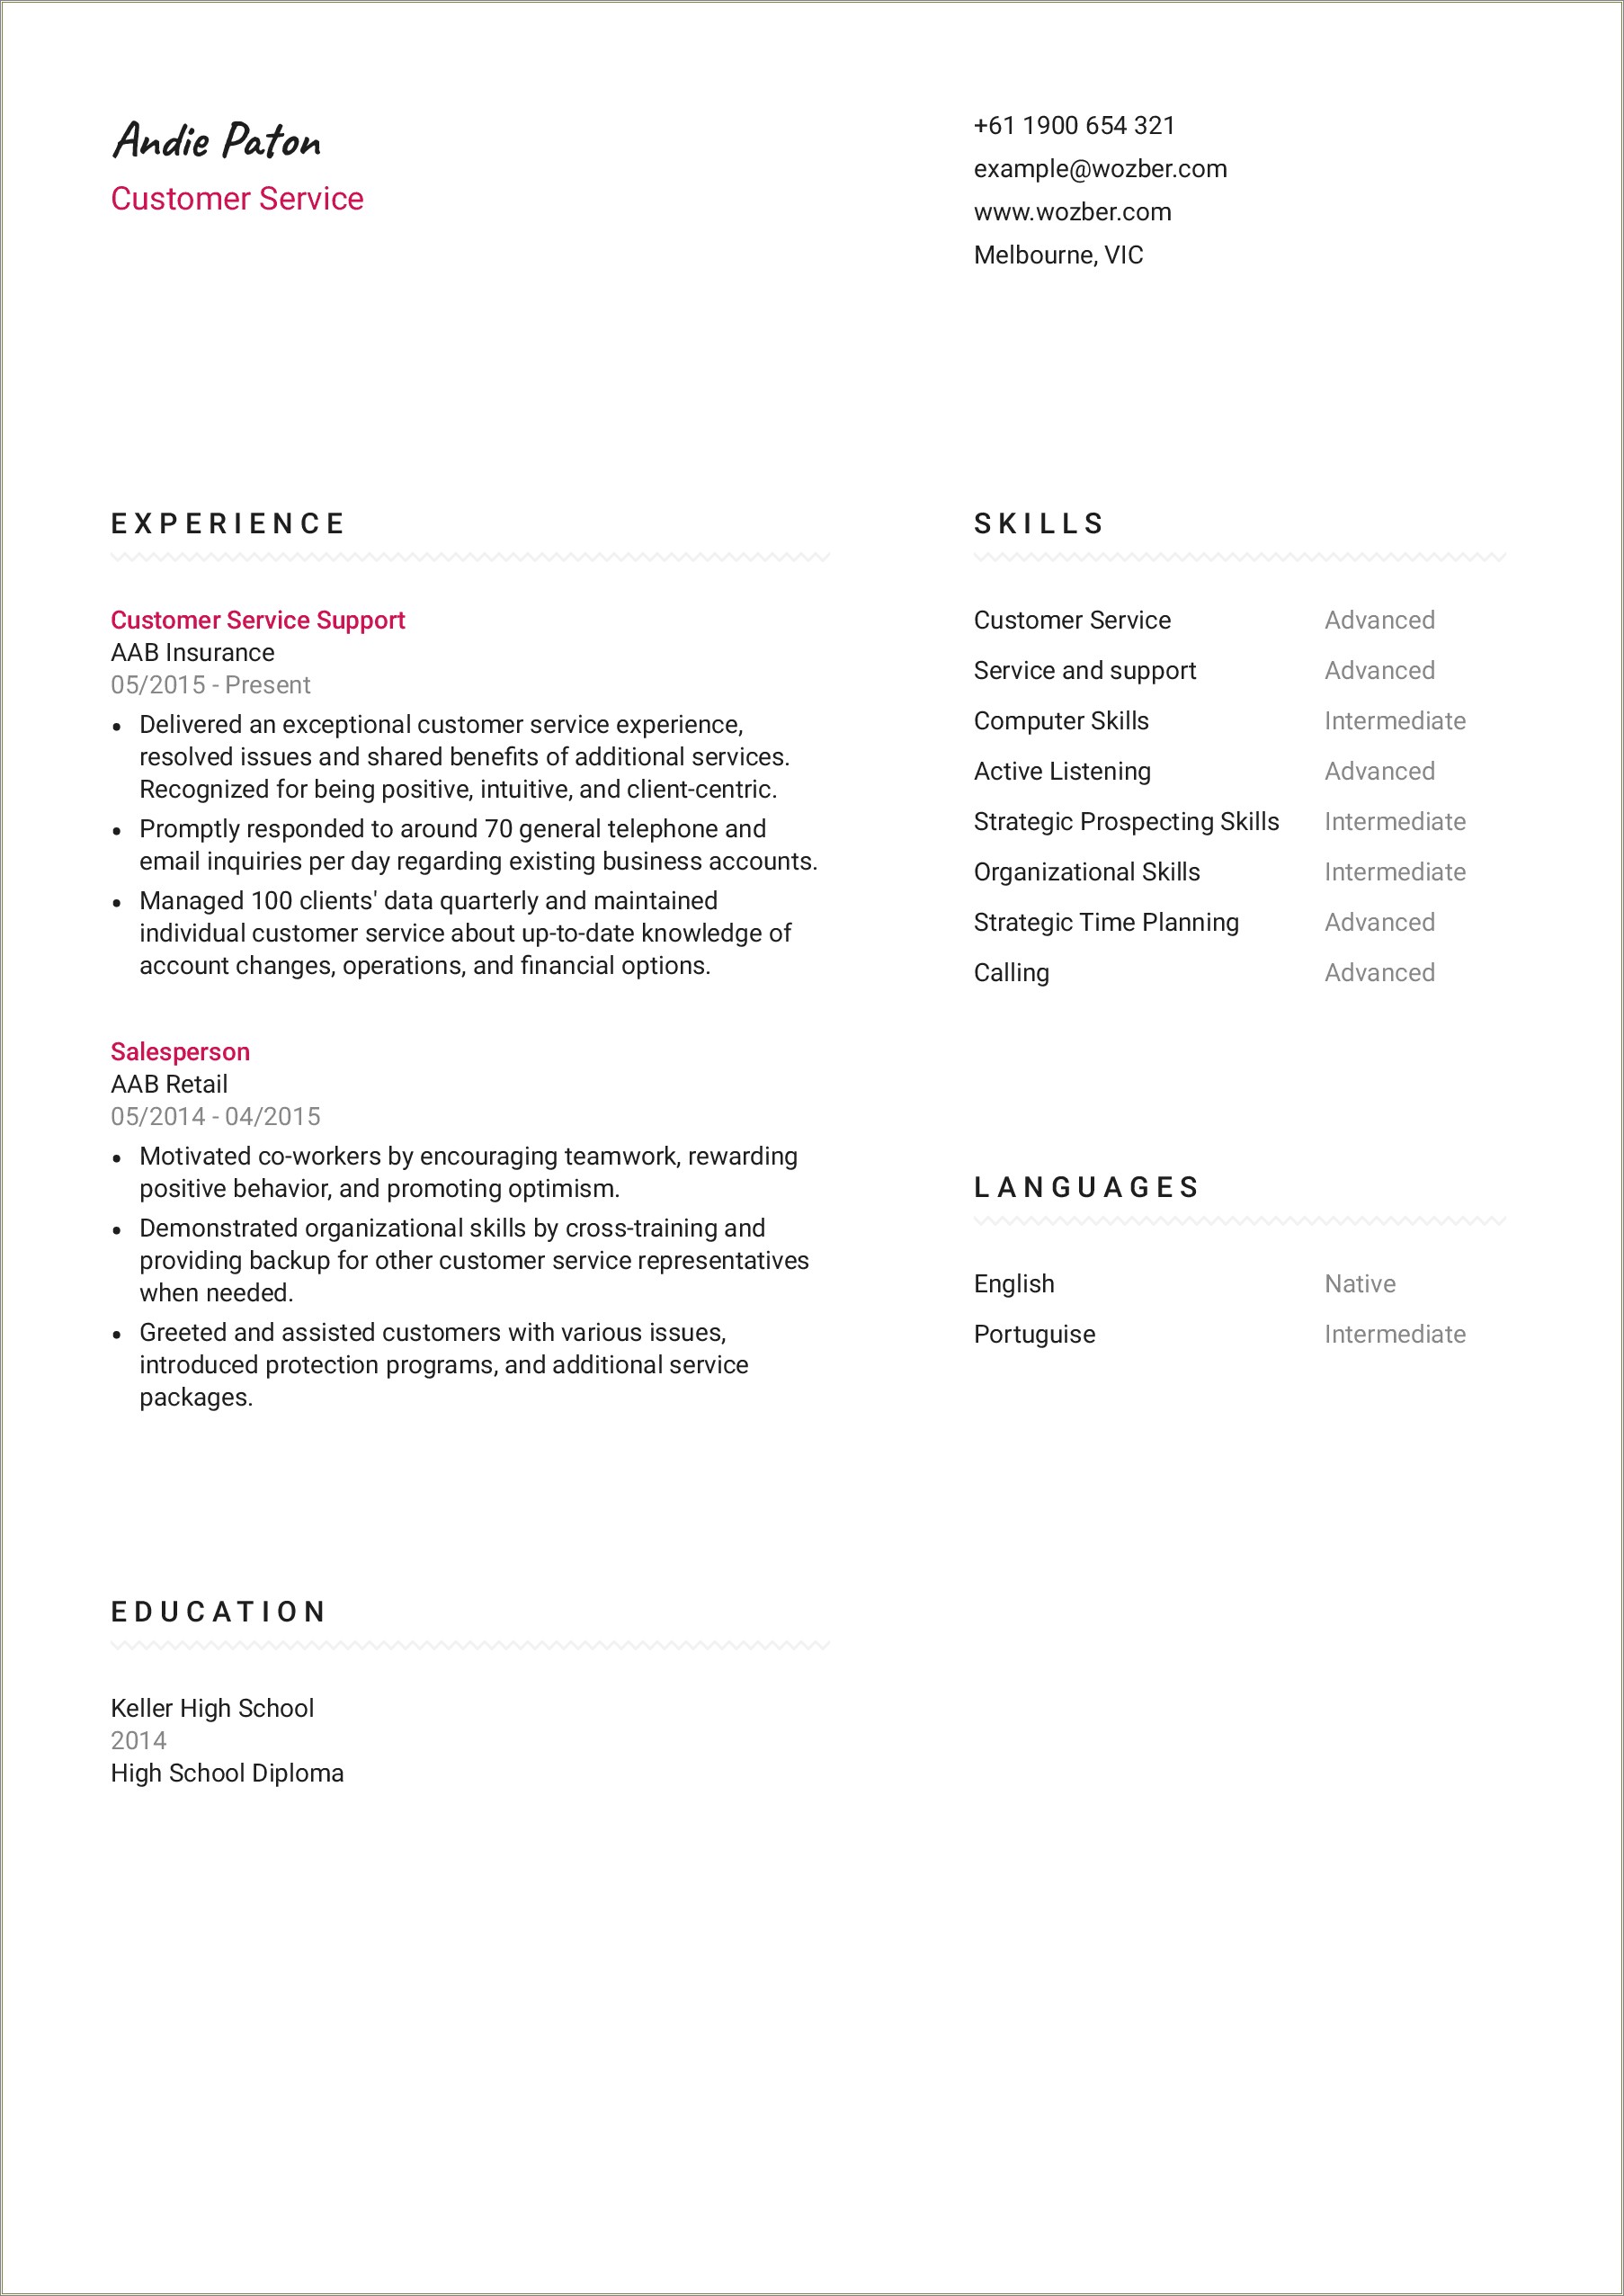 Customer Service Skills And Abilities For Resume